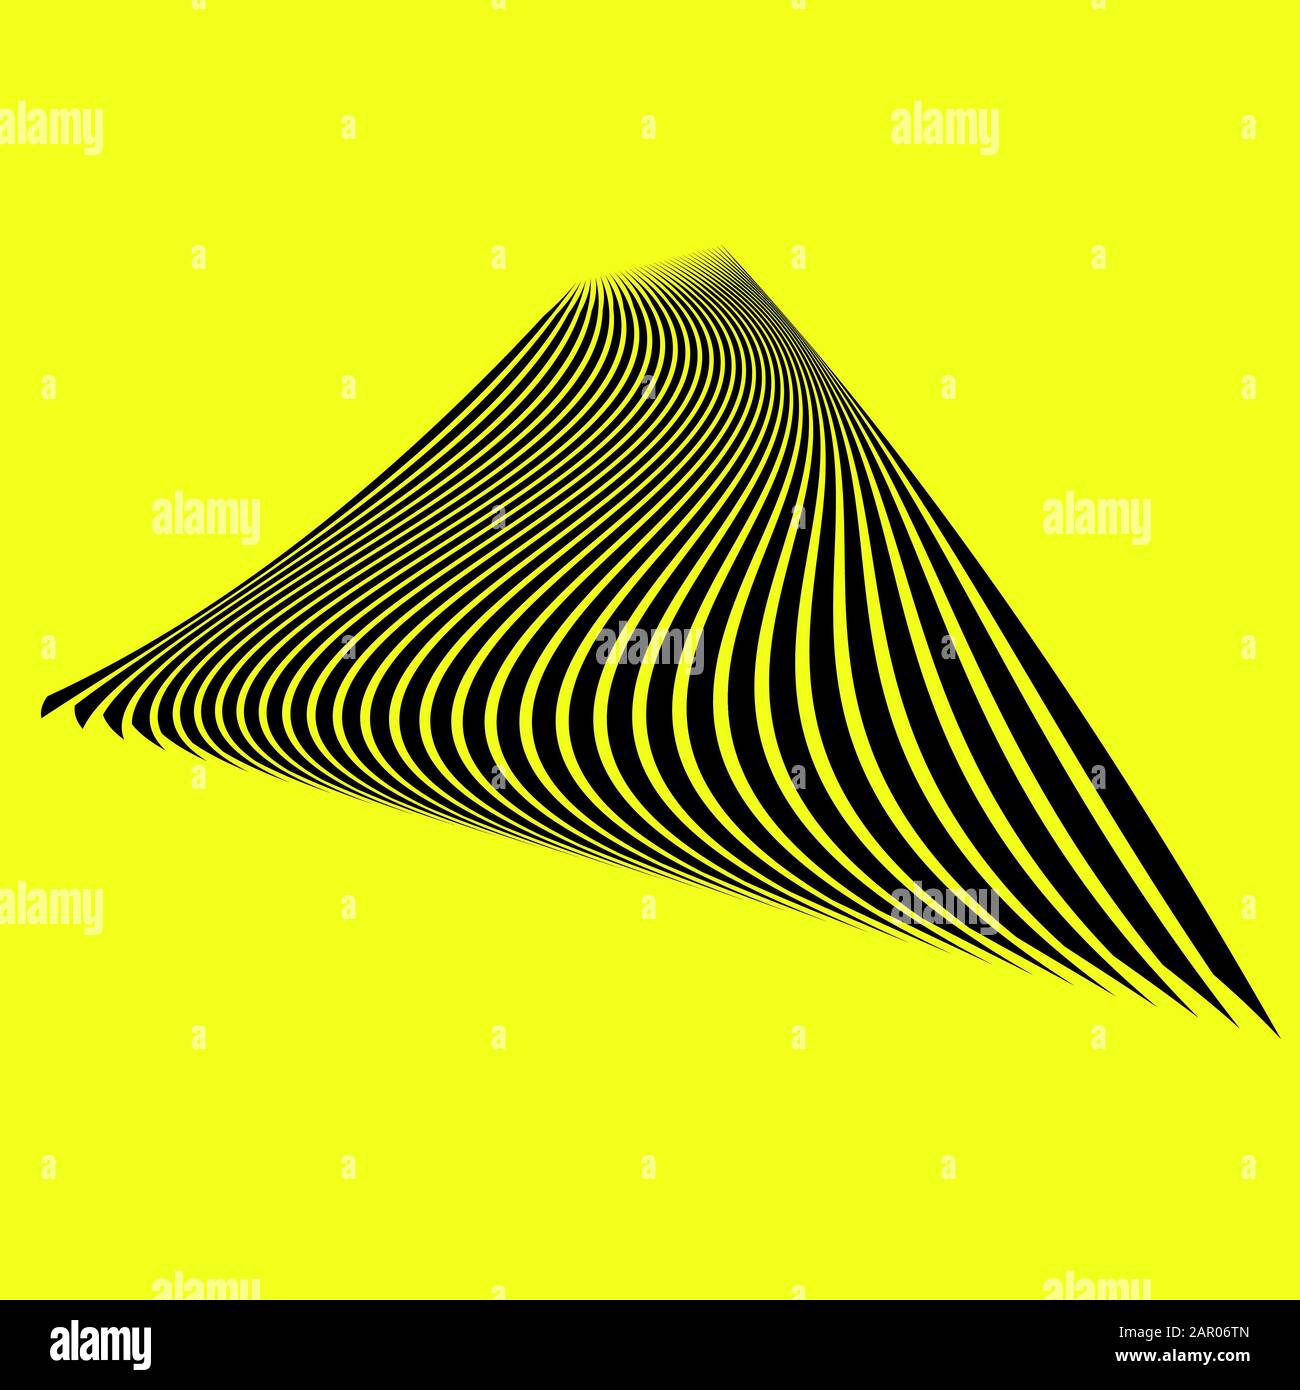 Yellow and black isometric line pattern vector Stock Photo